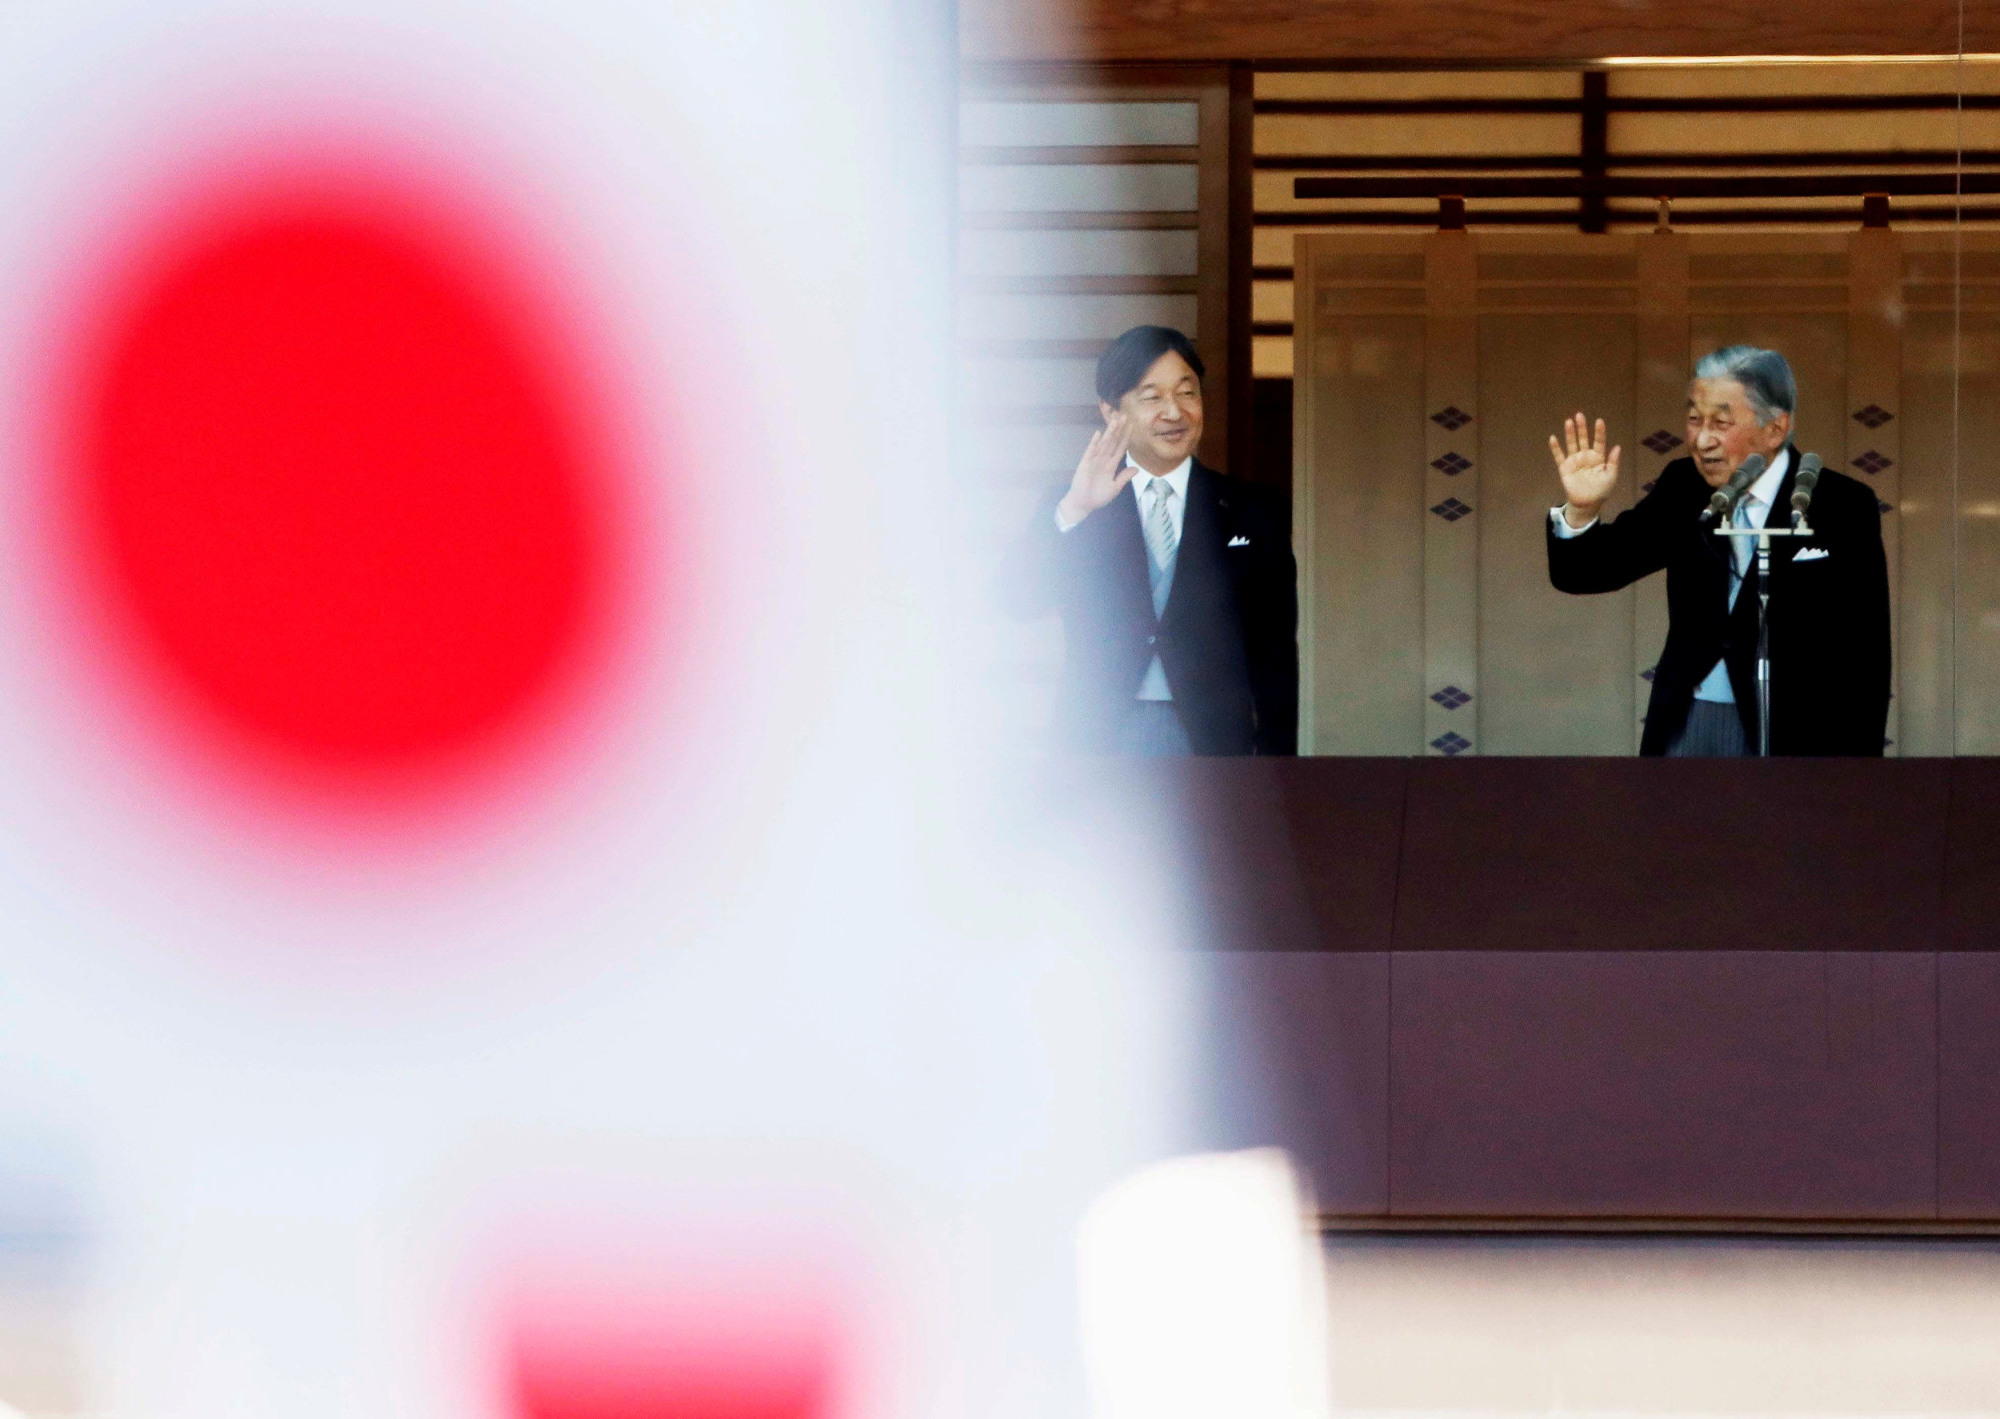 Emperor Akihito and Crown Prince Naruhito are seen behind Hinomaru flags as they wave to well-wishers during New Year's celebrations at the Imperial Palace in Tokyo on Jan. 2. | REUTERS